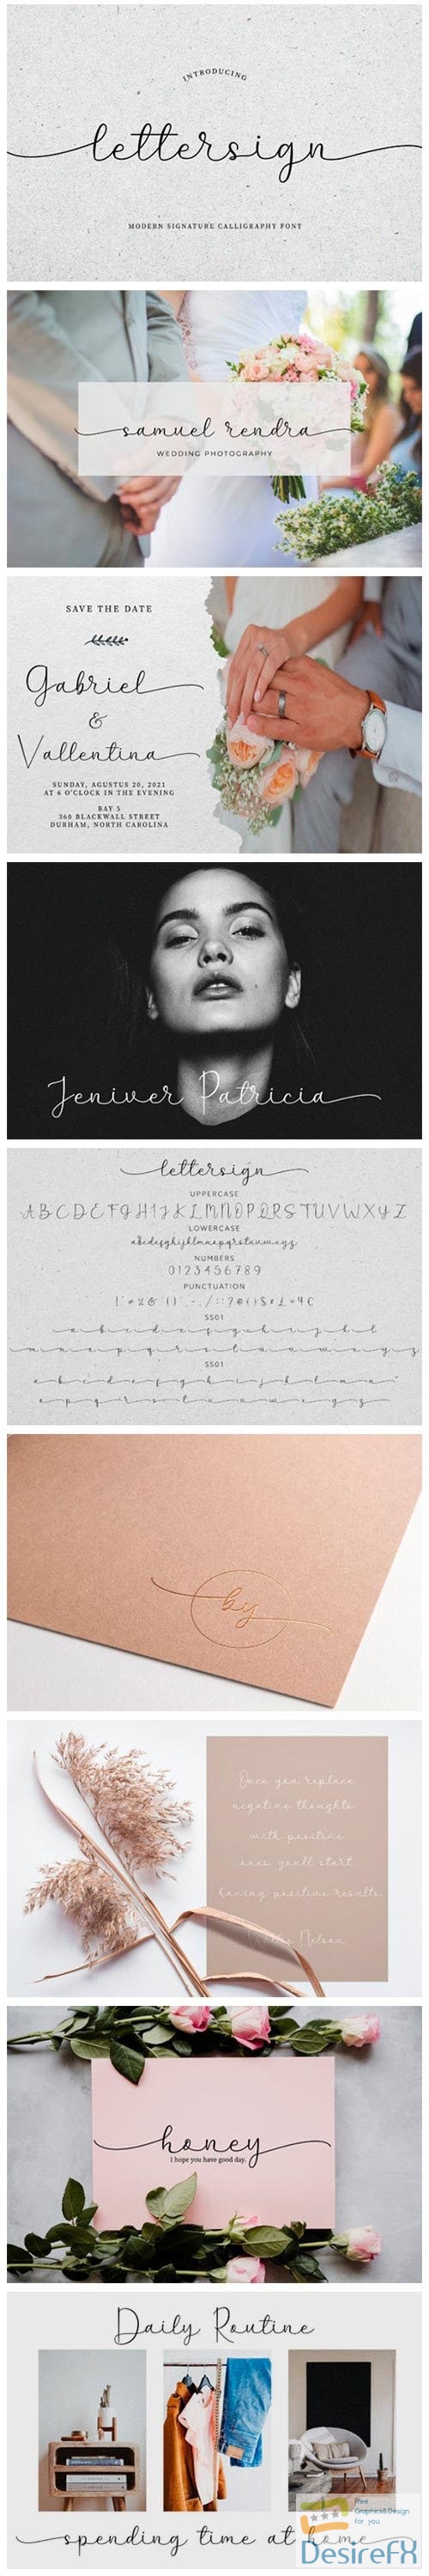 Lettersign - Modern Signature Calligraphy Font